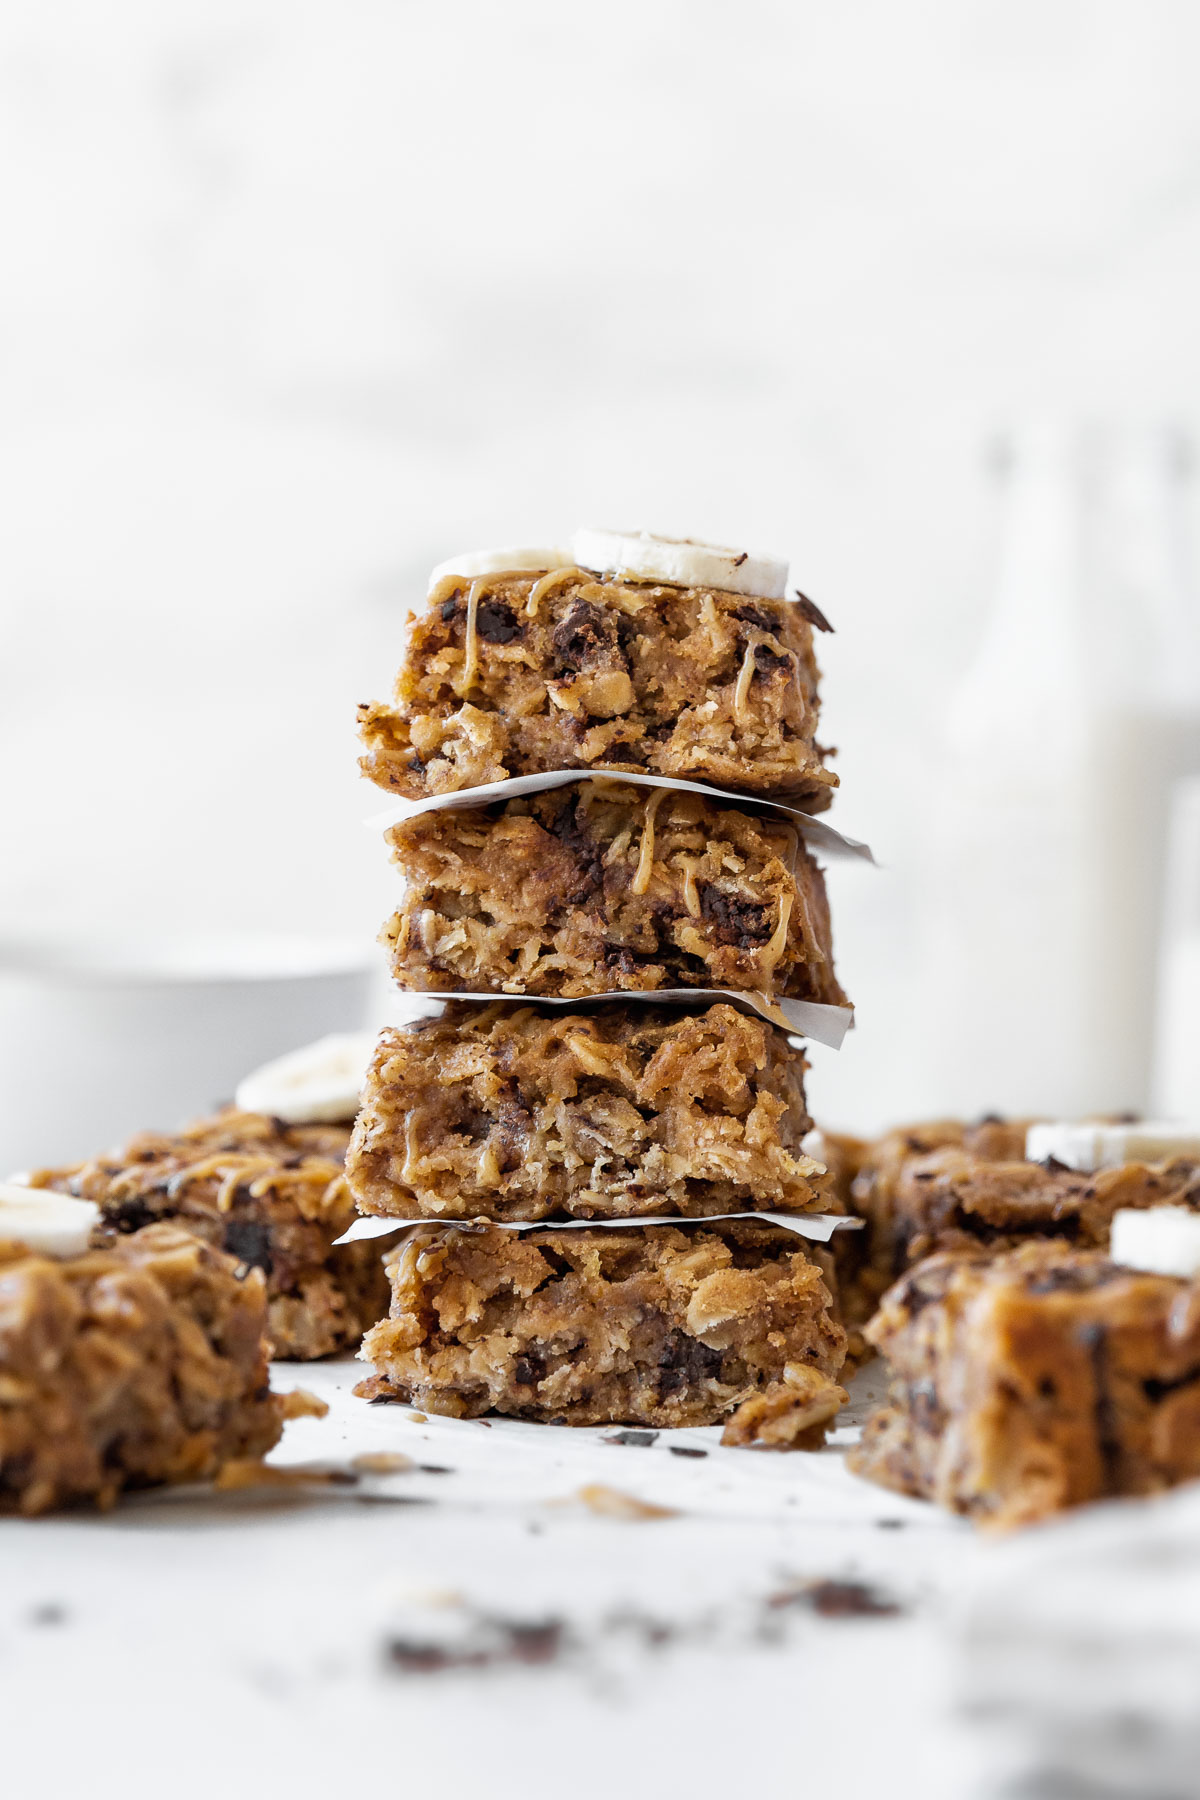 A stack of the peanut butter banana oatmeal bars on the counter.